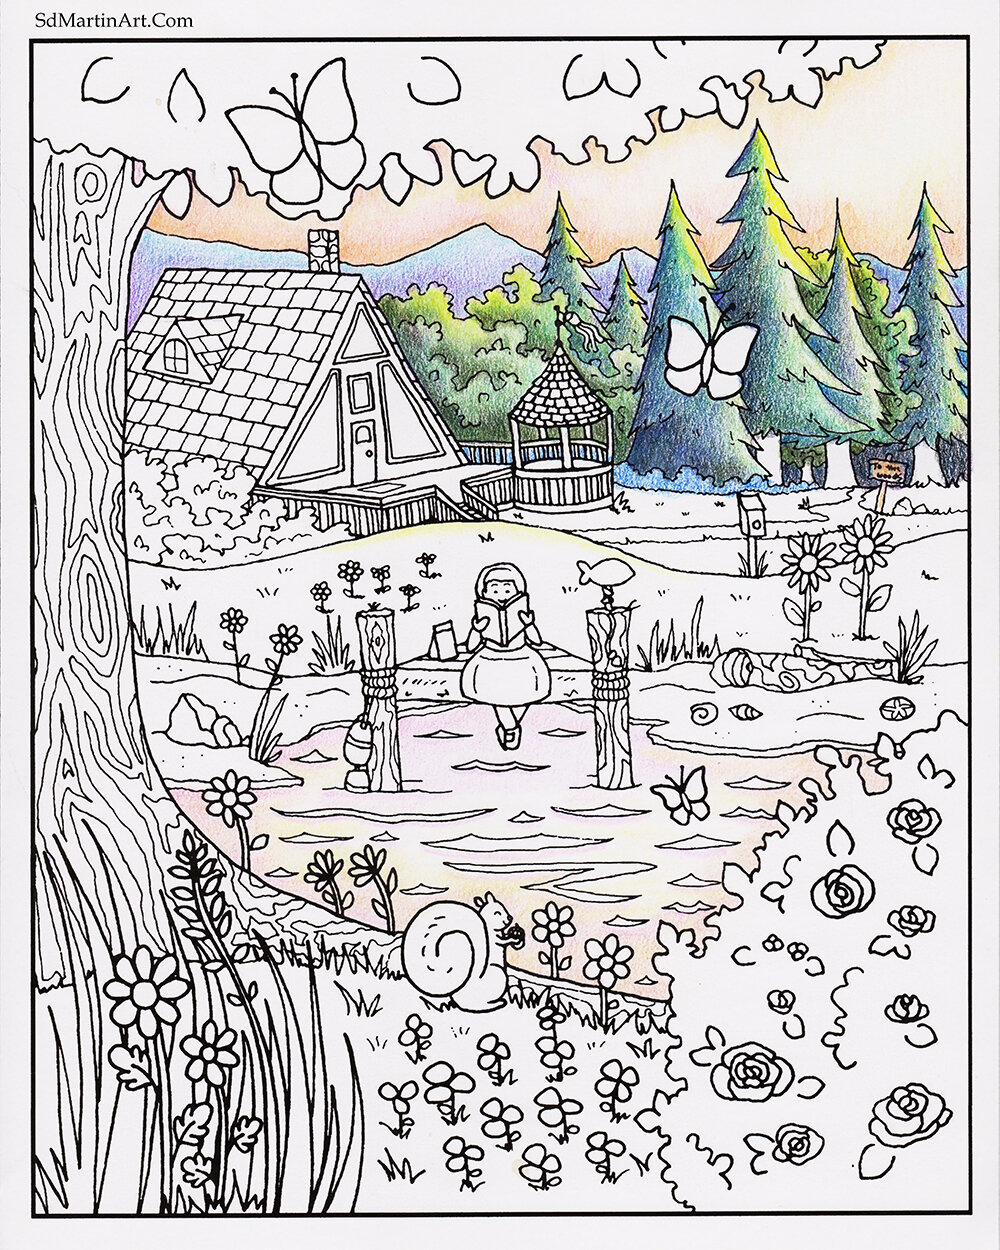 Free Coloring Page_A Frame Cottage_Coloring Progress 2_color scan_Edited LR with WM.jpg